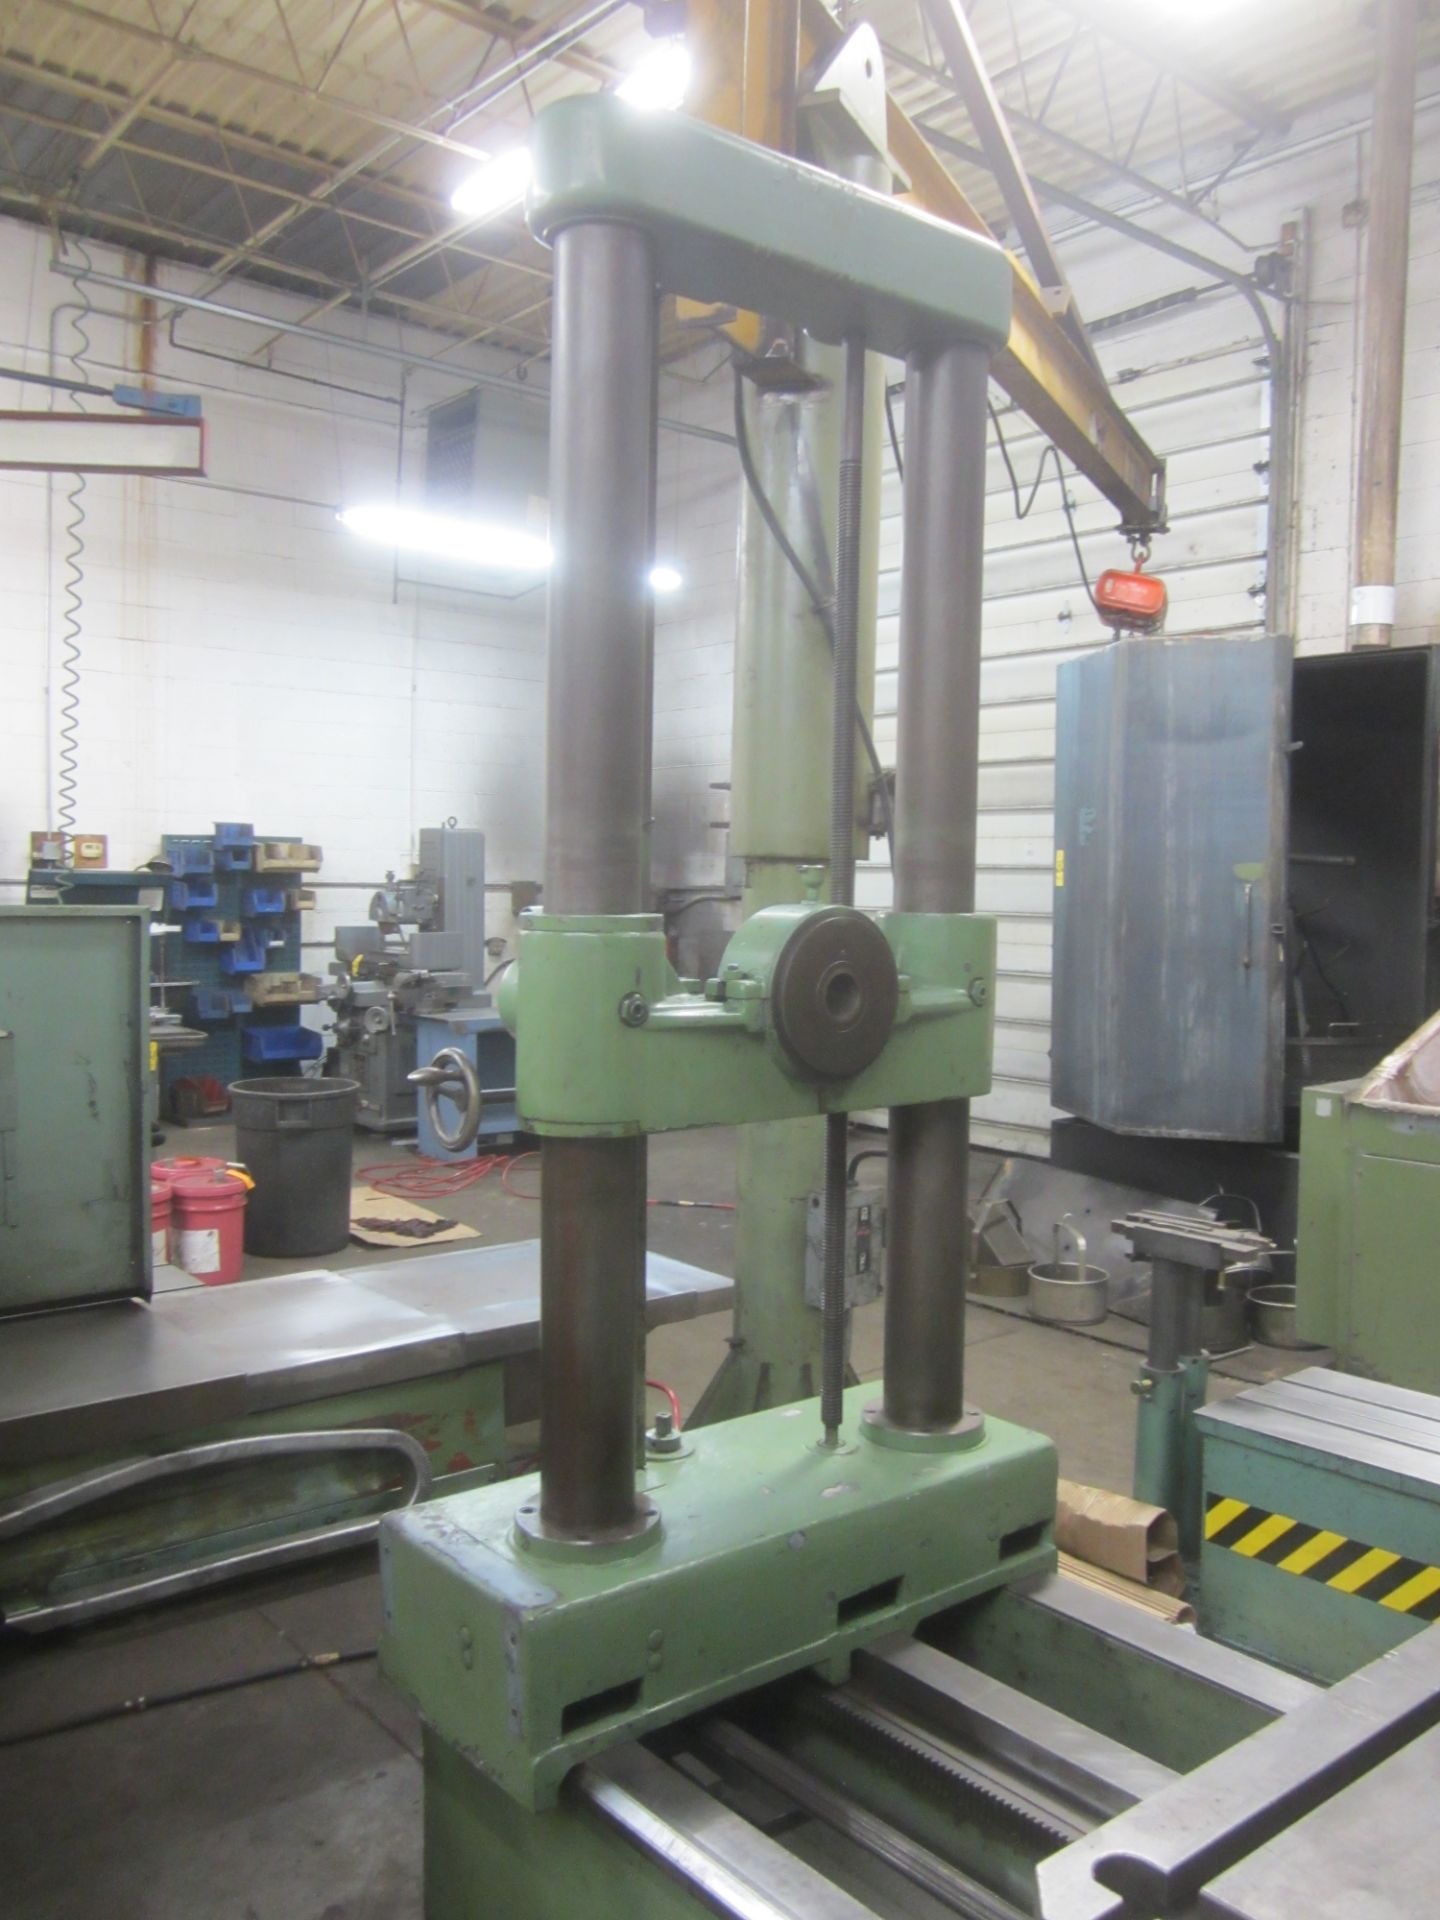 Scharmann 3" Horizontal Boring Mill, s/n 7146, 44" X 48" Power Rotary Table, Outboard Support, 51" - Image 4 of 9